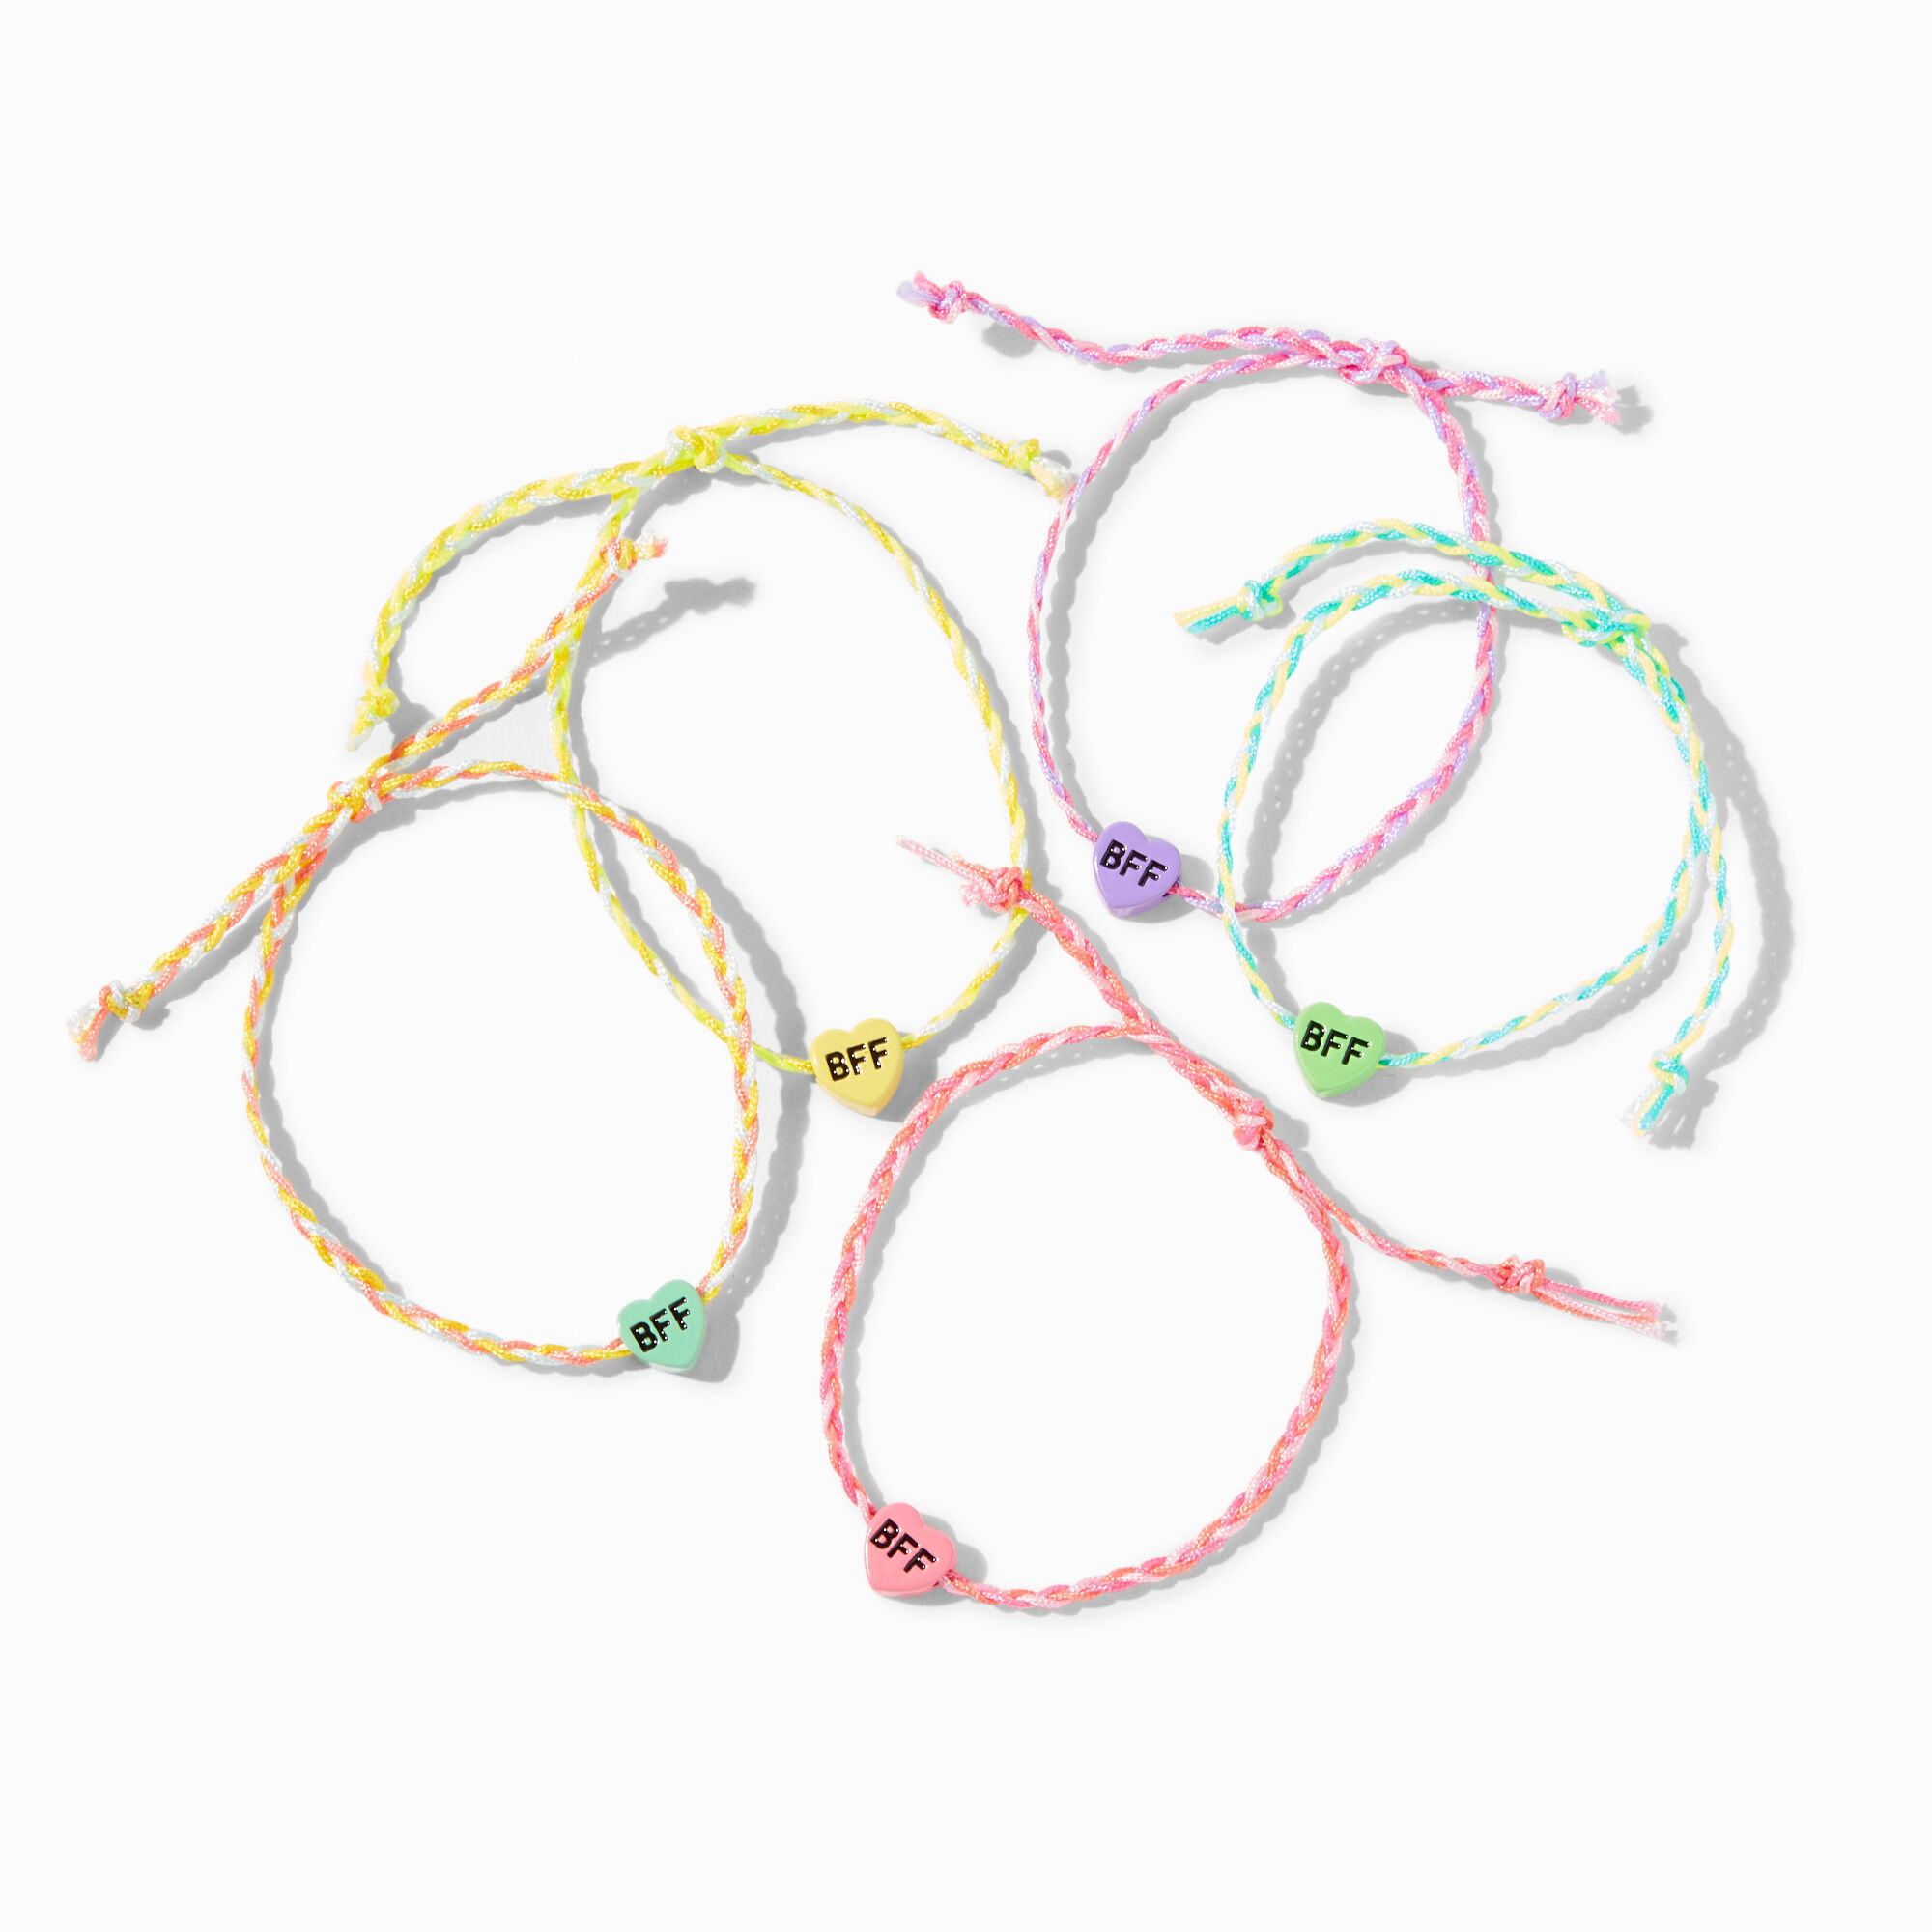 View Claires Best Friends Heart Braided Bracelets 5 Pack Rainbow information